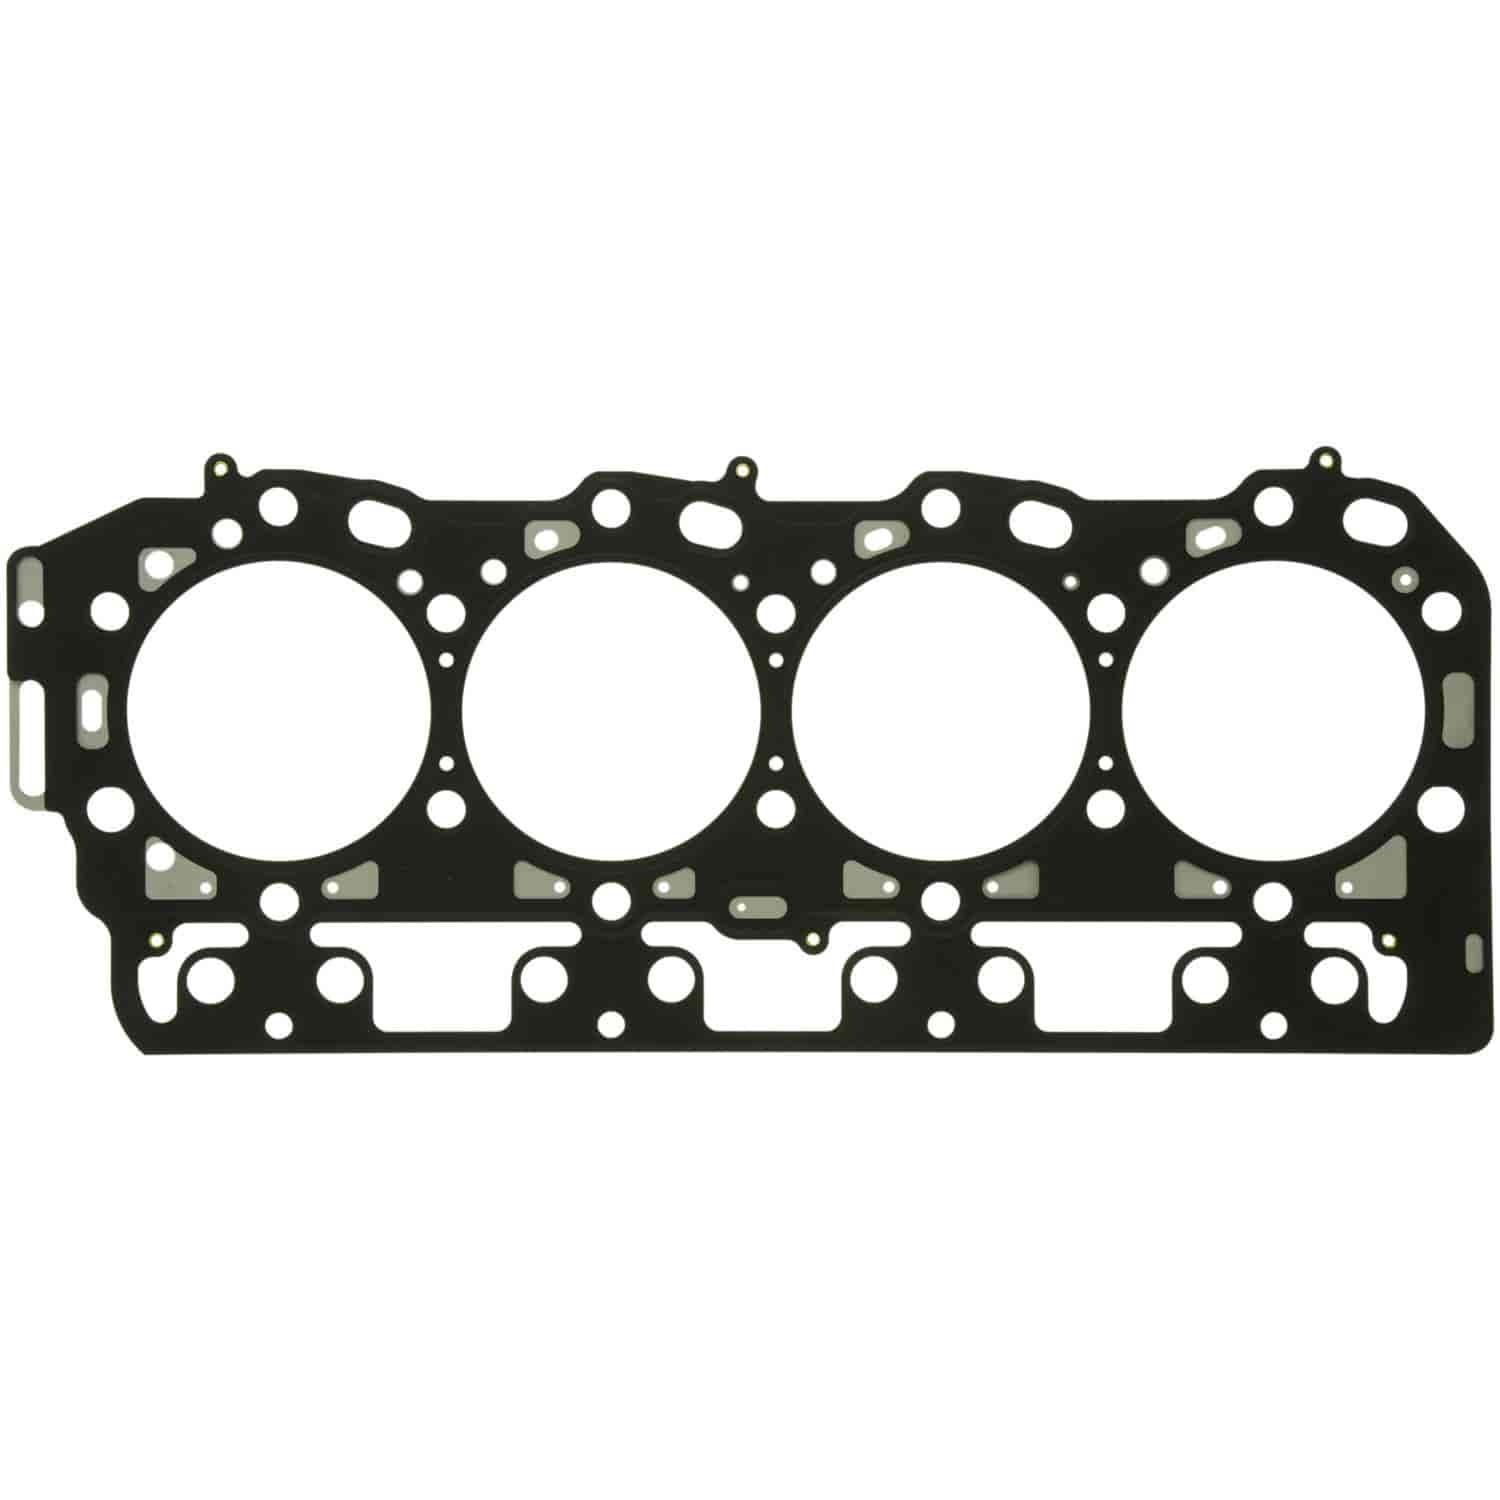 Cylinder Head Gasket 2001-2011 Chevy Duramax Diesel V8 6.6L (Right Side) 106mm Bore